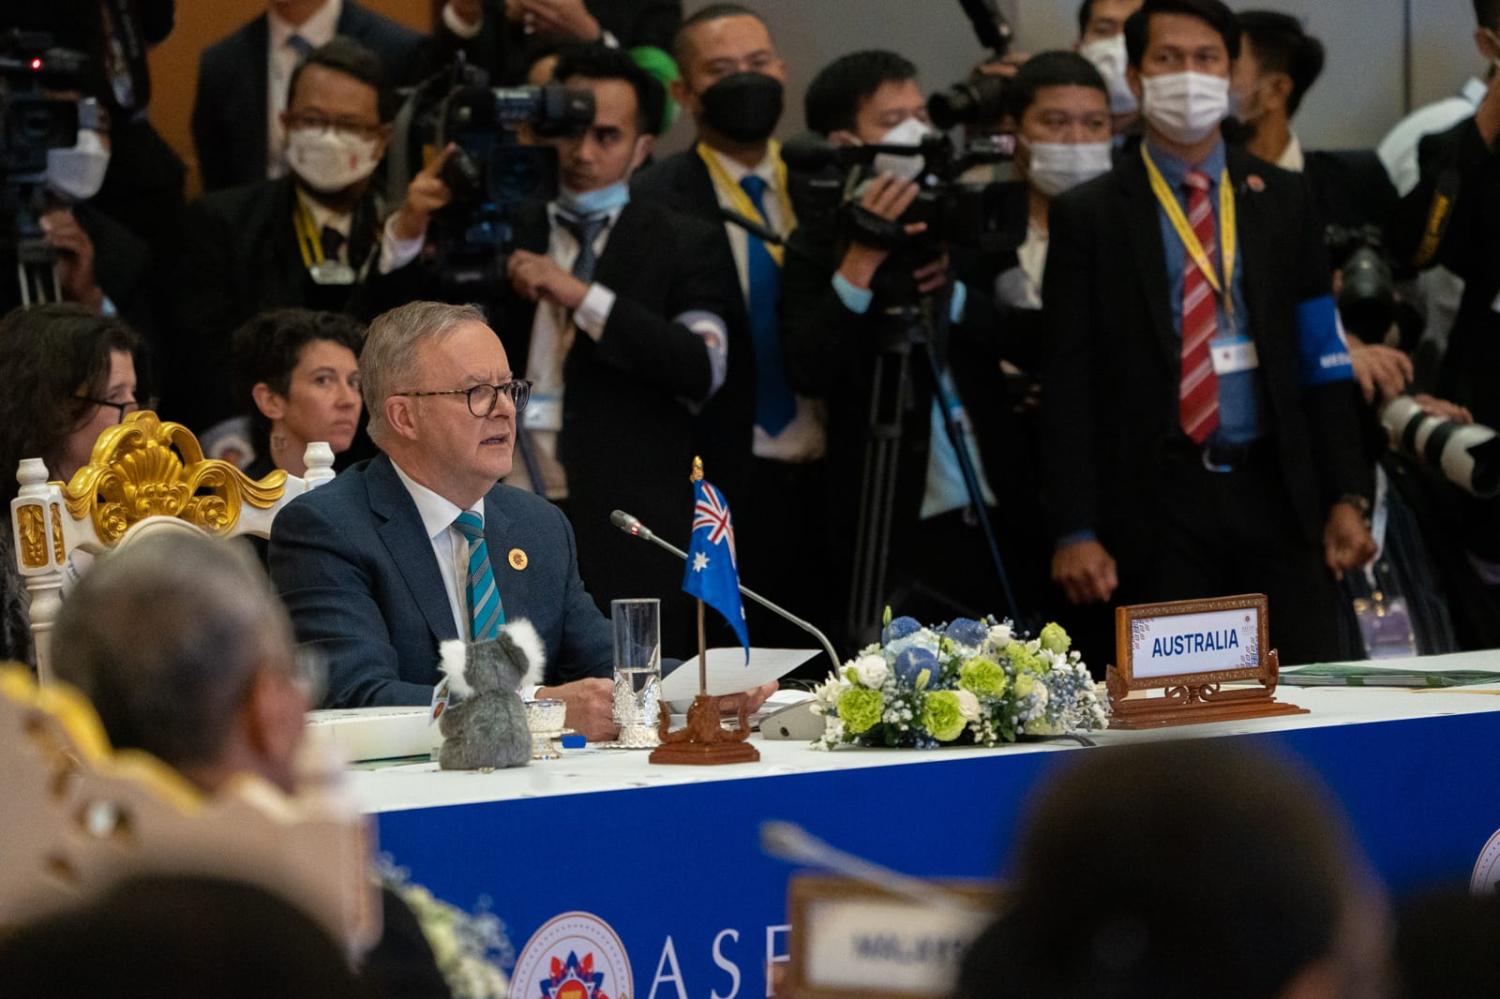 Prime Minister Anthony Albanese at the 2022 ASEAN summit (@AlboMP/X)